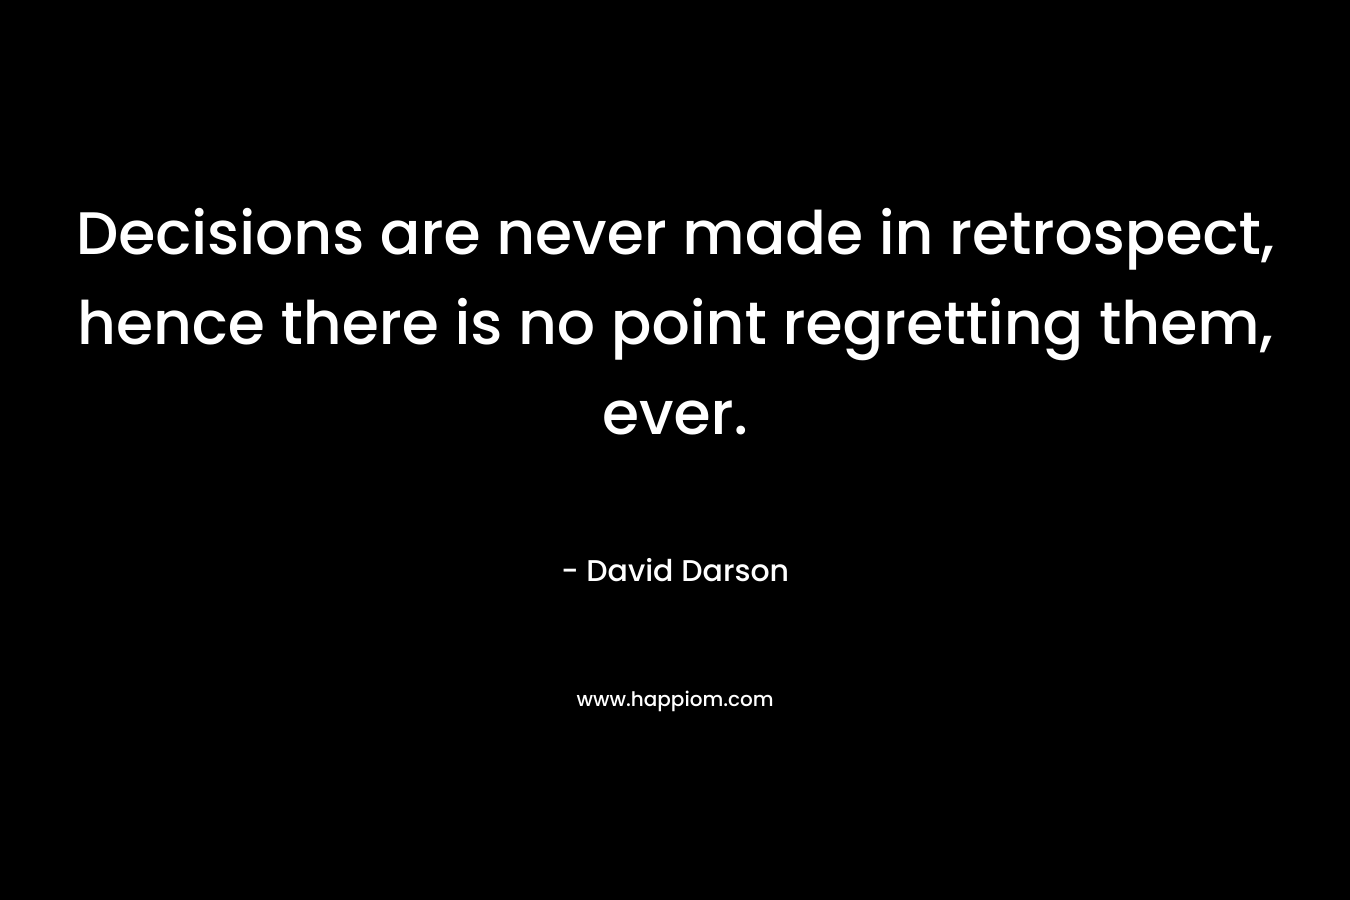 Decisions are never made in retrospect, hence there is no point regretting them, ever. – David Darson